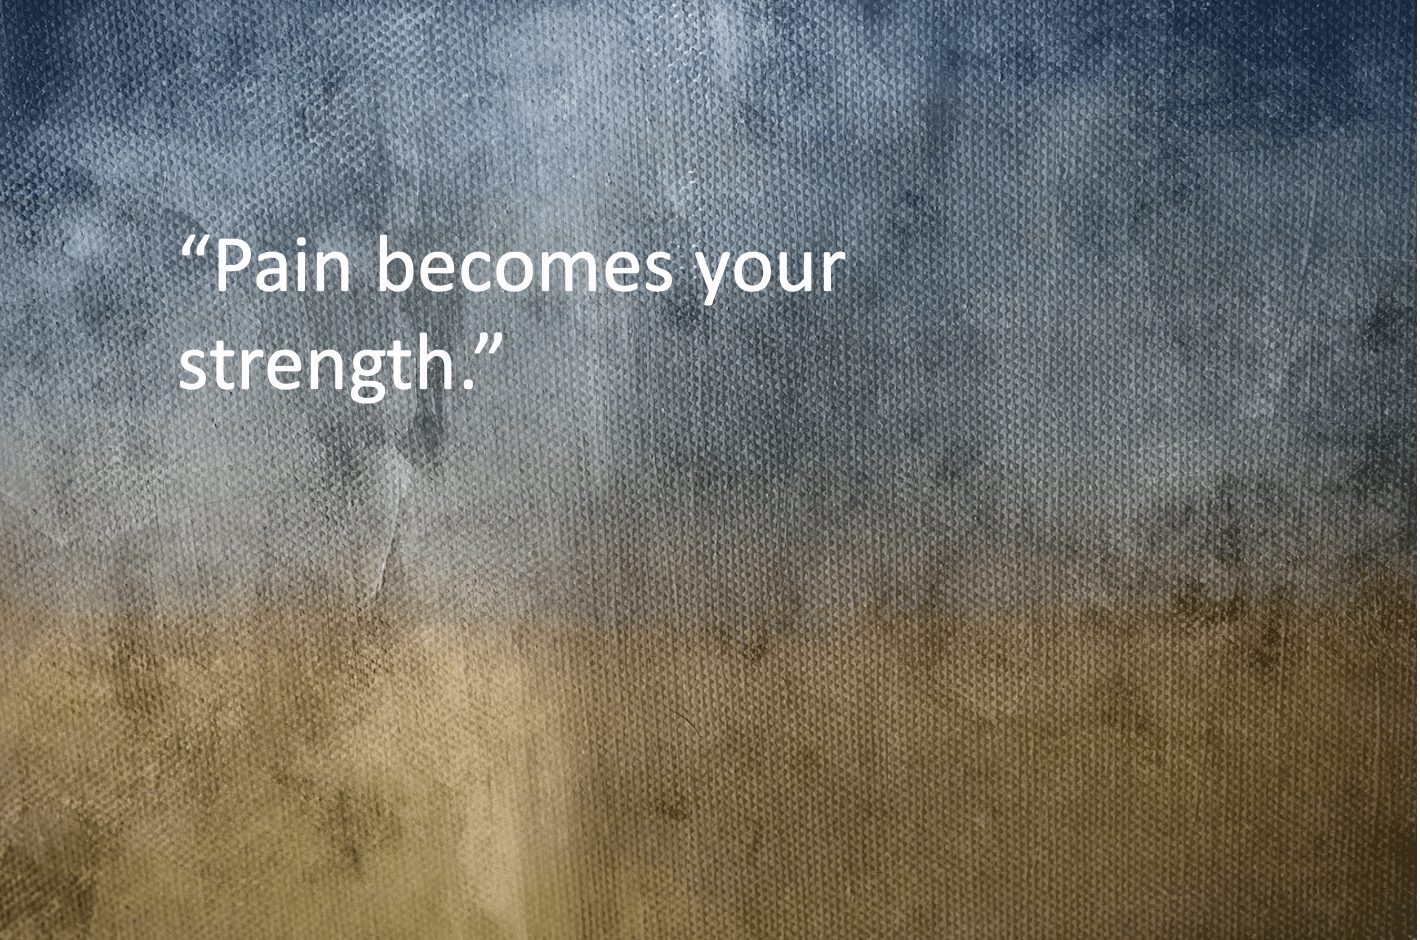 Pain becomes your strength